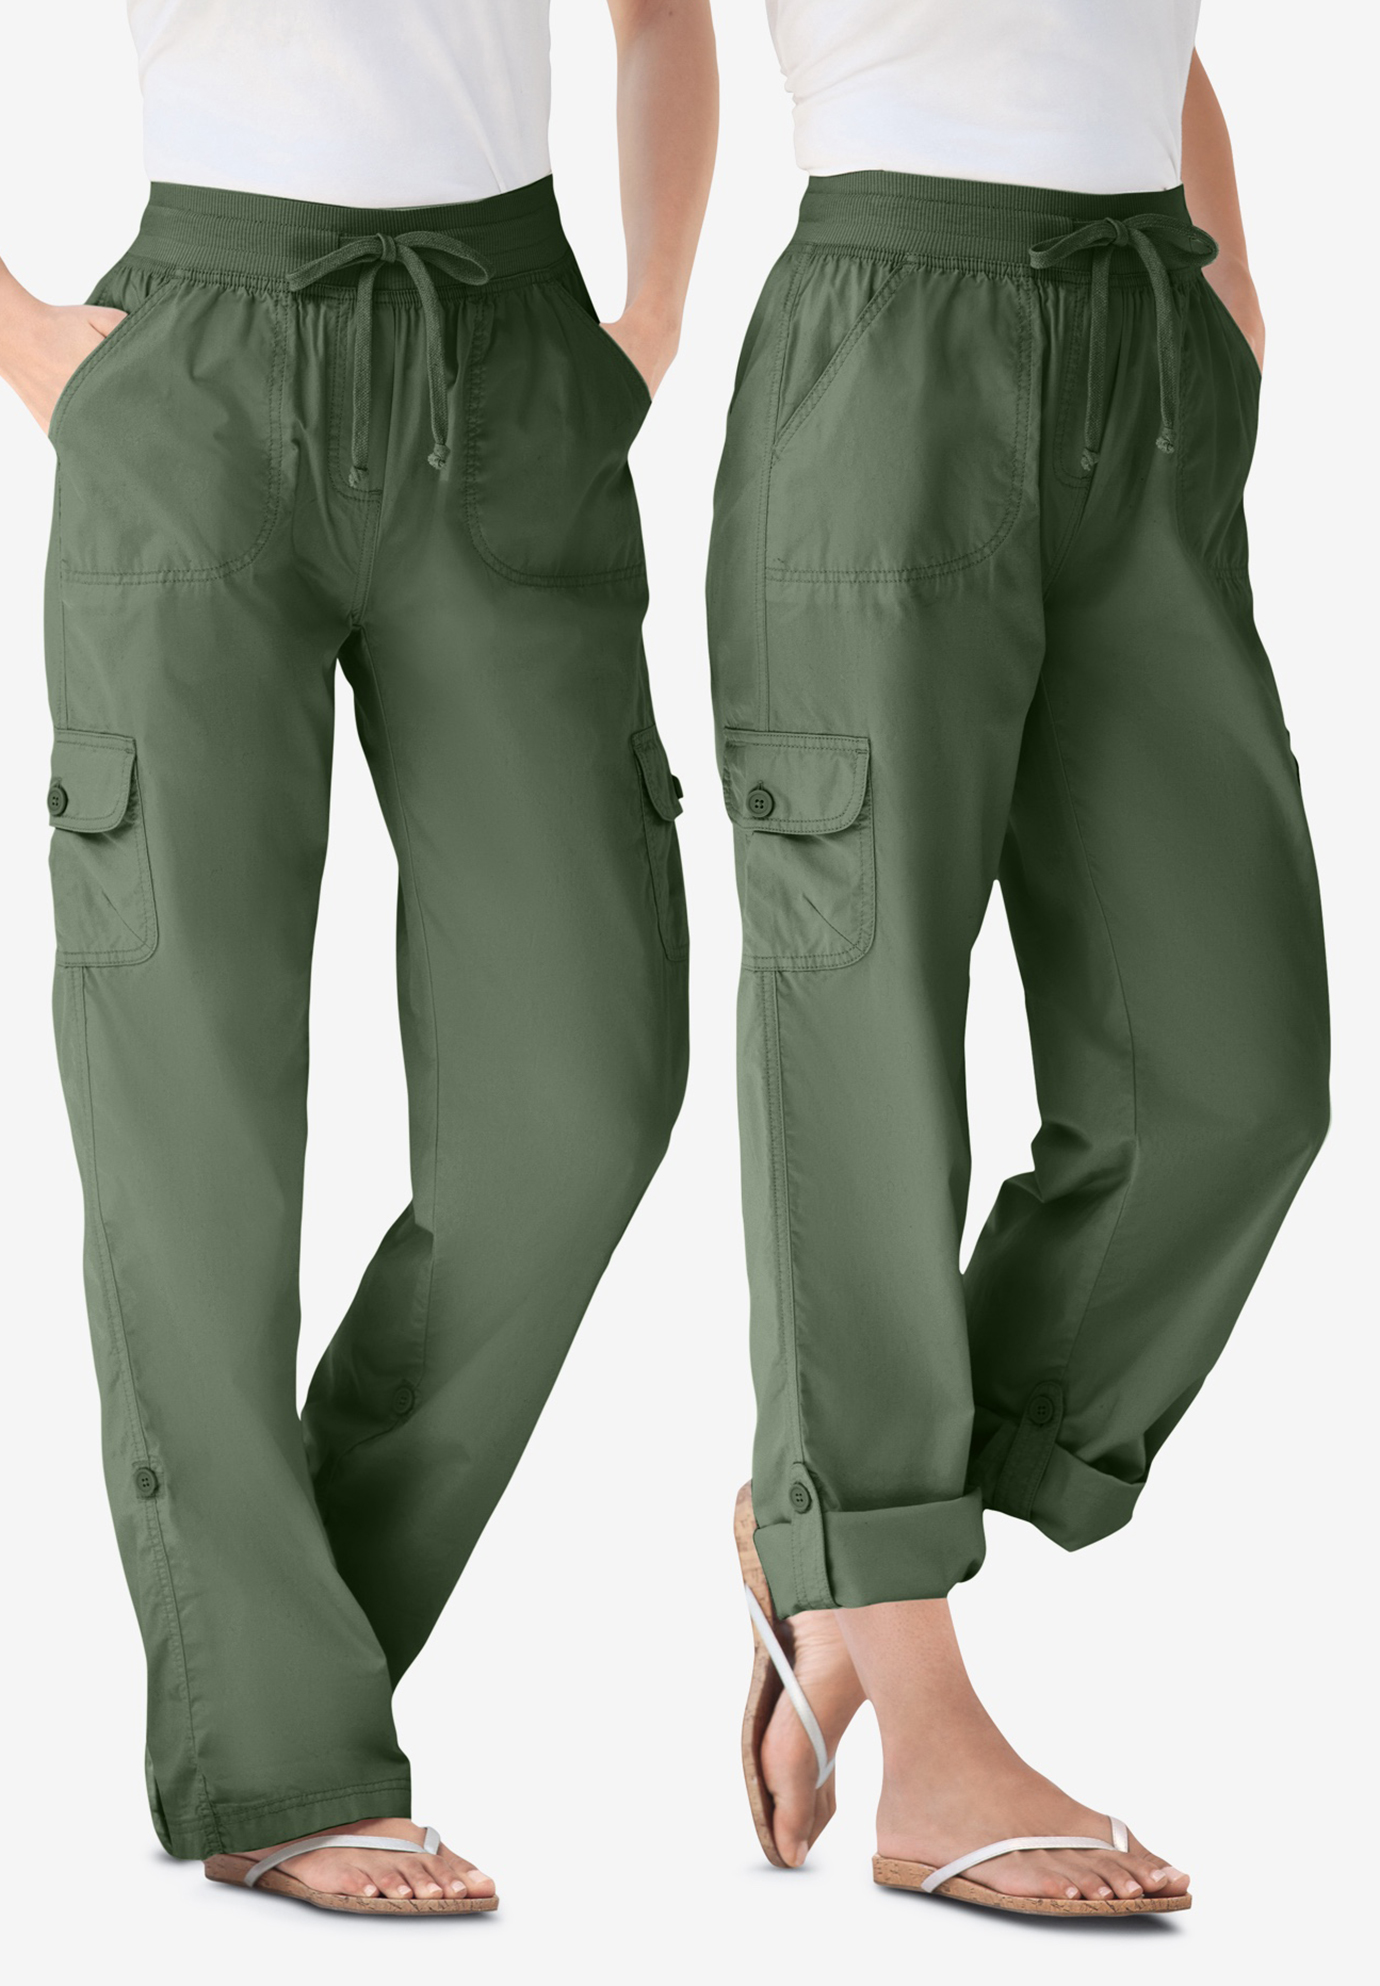 olive green utility pants